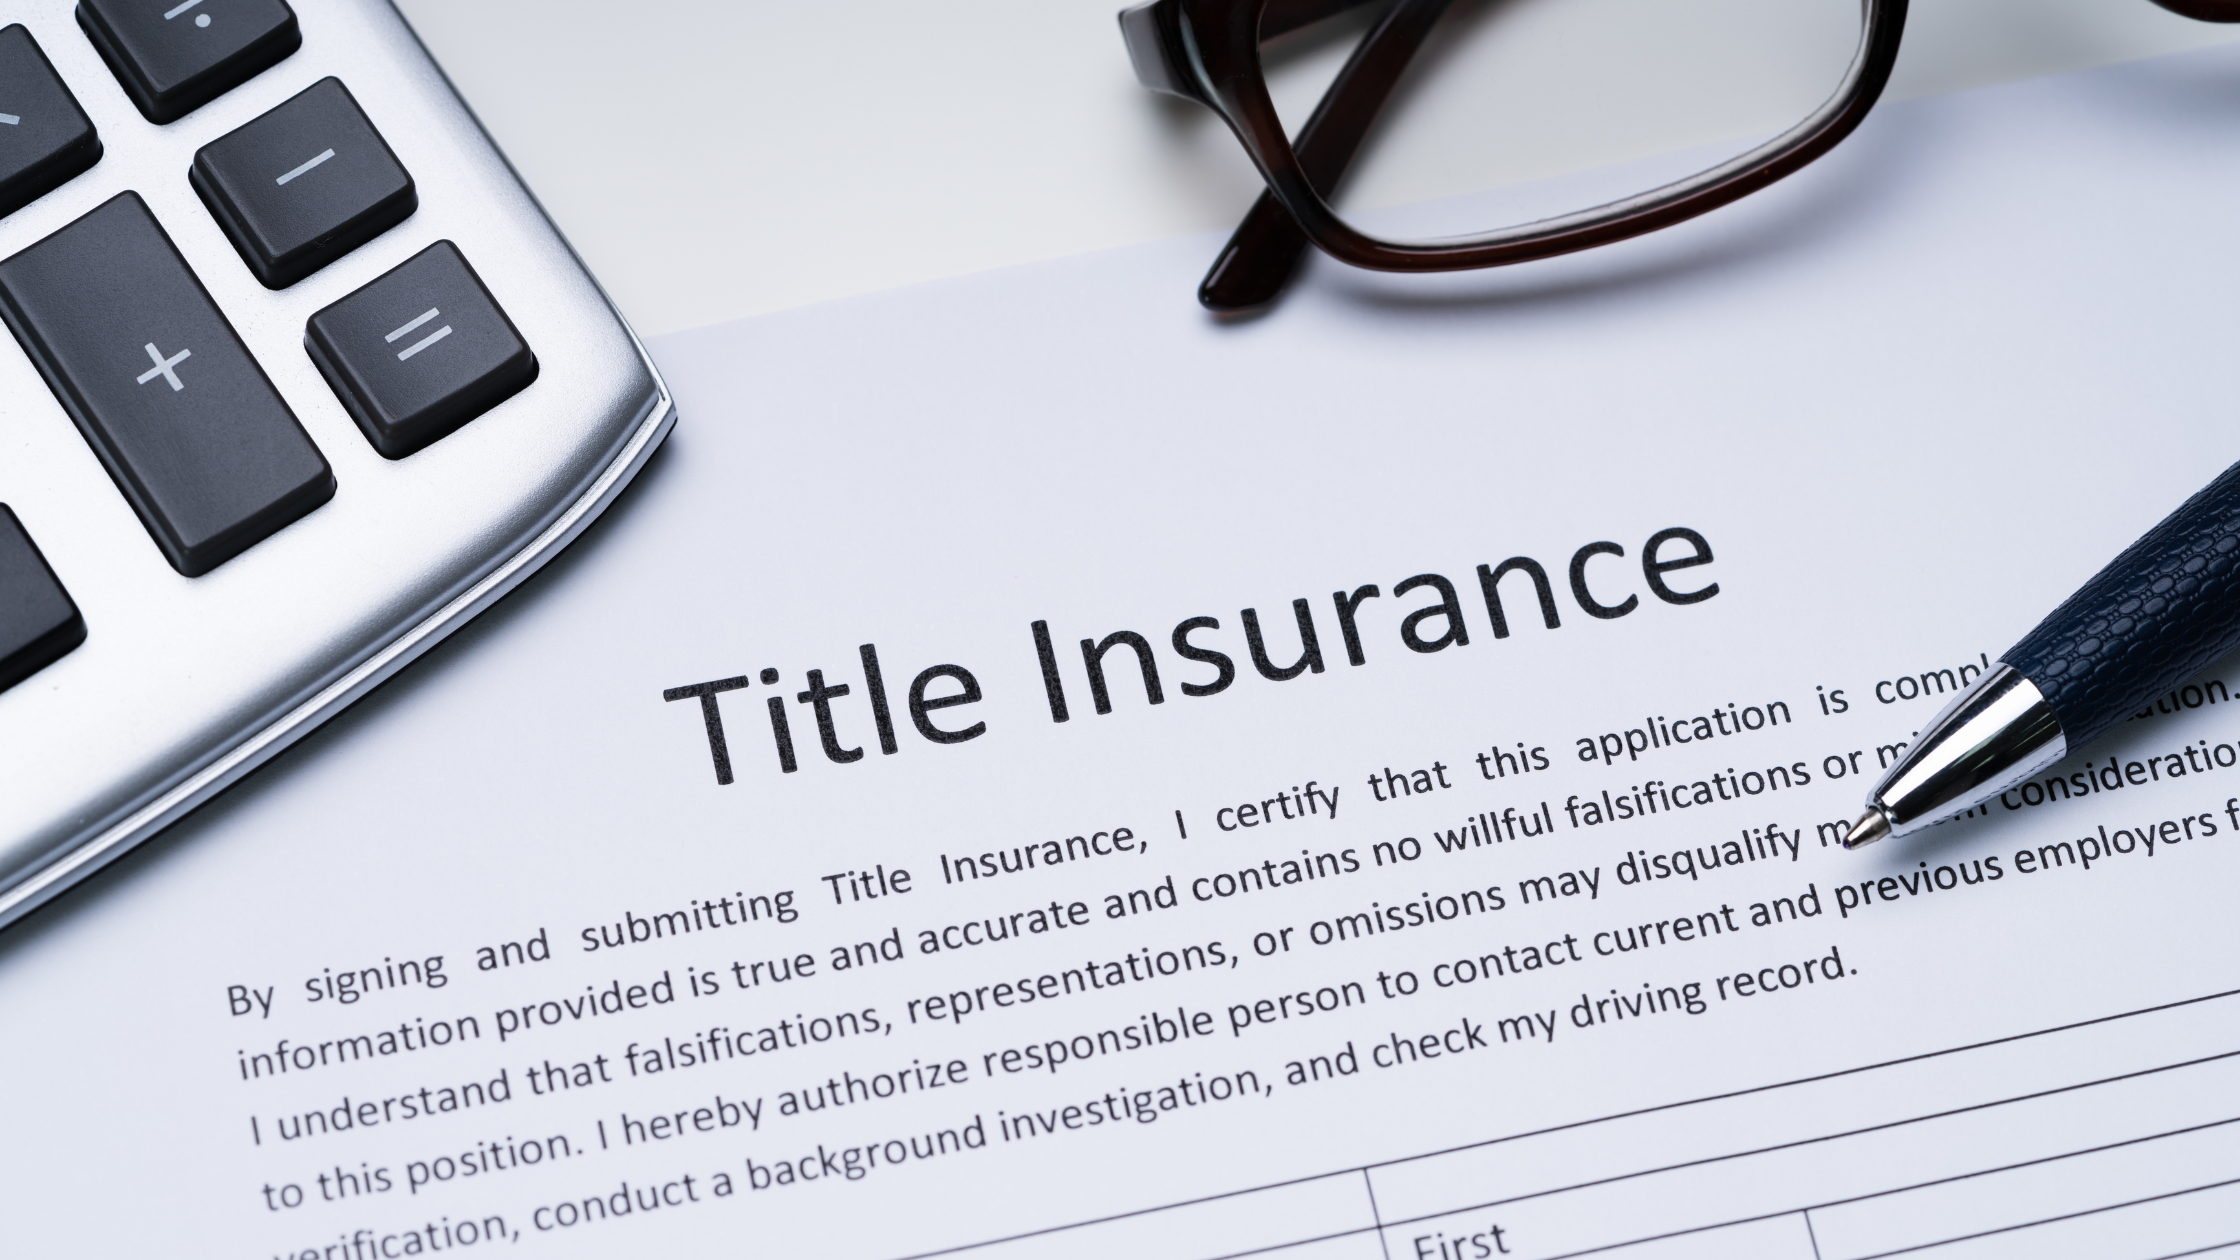 Title Insurance: A Crucial Element for Physicians Buying a Home